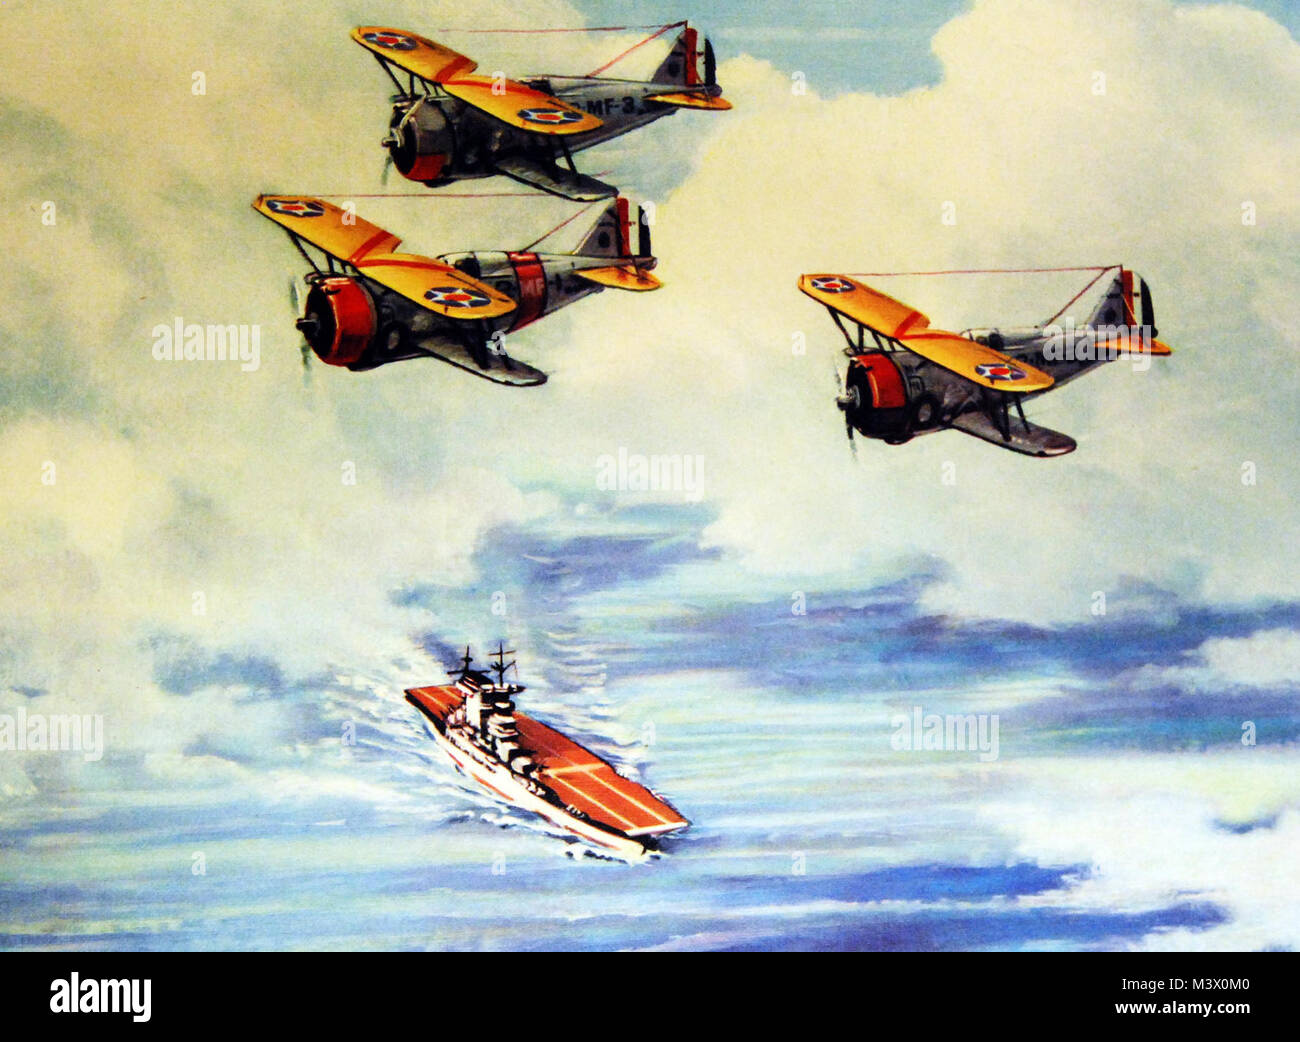 Lot-4908-4: WWII-US Aircraft.    “Over the Nest”.   Grumman F3F-2 fighters over aircraft carrier.    Artwork by Charles H. Hubbell.  Courtesy of the Library of Congress.  (2018/02/02). Lot-4908-4 39334684614 o Stock Photo